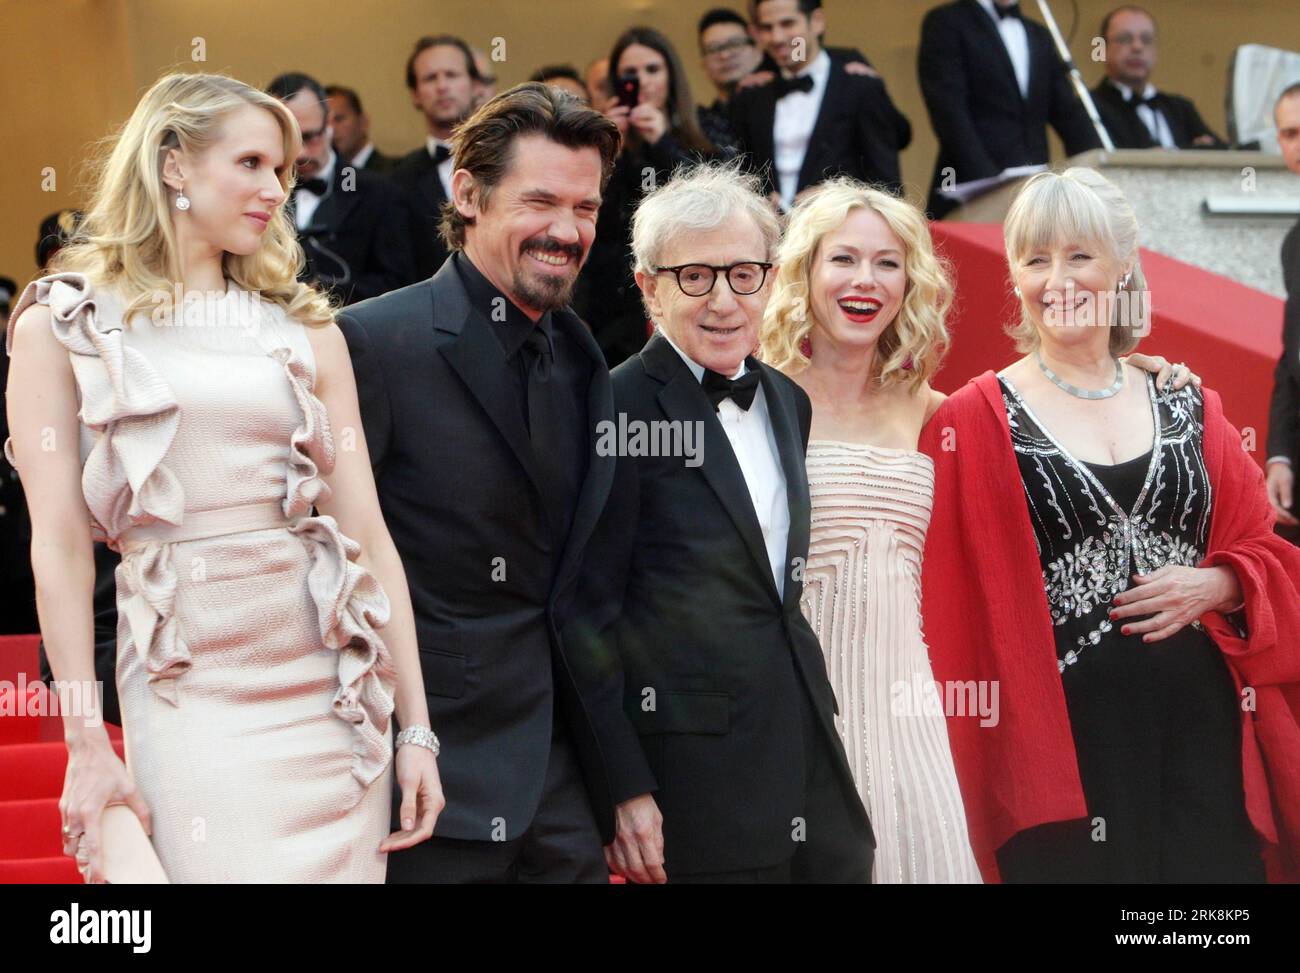 Bildnummer: 54050812  Datum: 15.05.2010  Copyright: imago/Xinhua (100516) -- CANNES, May 16, 2010 (Xinhua) -- British actress Lucy Punch, US actor Josh Brolin, US director Woody Allen, British-born Australian actress Naomi Watts and British actress Gemma Jones (from L to R) arrive for the screening of You Will Meet a Tall Dark Stranger presented out of competition at the 63rd Cannes Film Festival in Cannes, France, May 15, 2010. (Xinhua/Xiao He) (yc) (2)FRANCE-CANNES-WOODY ALLEN PUBLICATIONxNOTxINxCHN People Kultur Entertainment Film 63. Internationale Filmfestspiele Cannes Filmfestival Premie Stock Photo